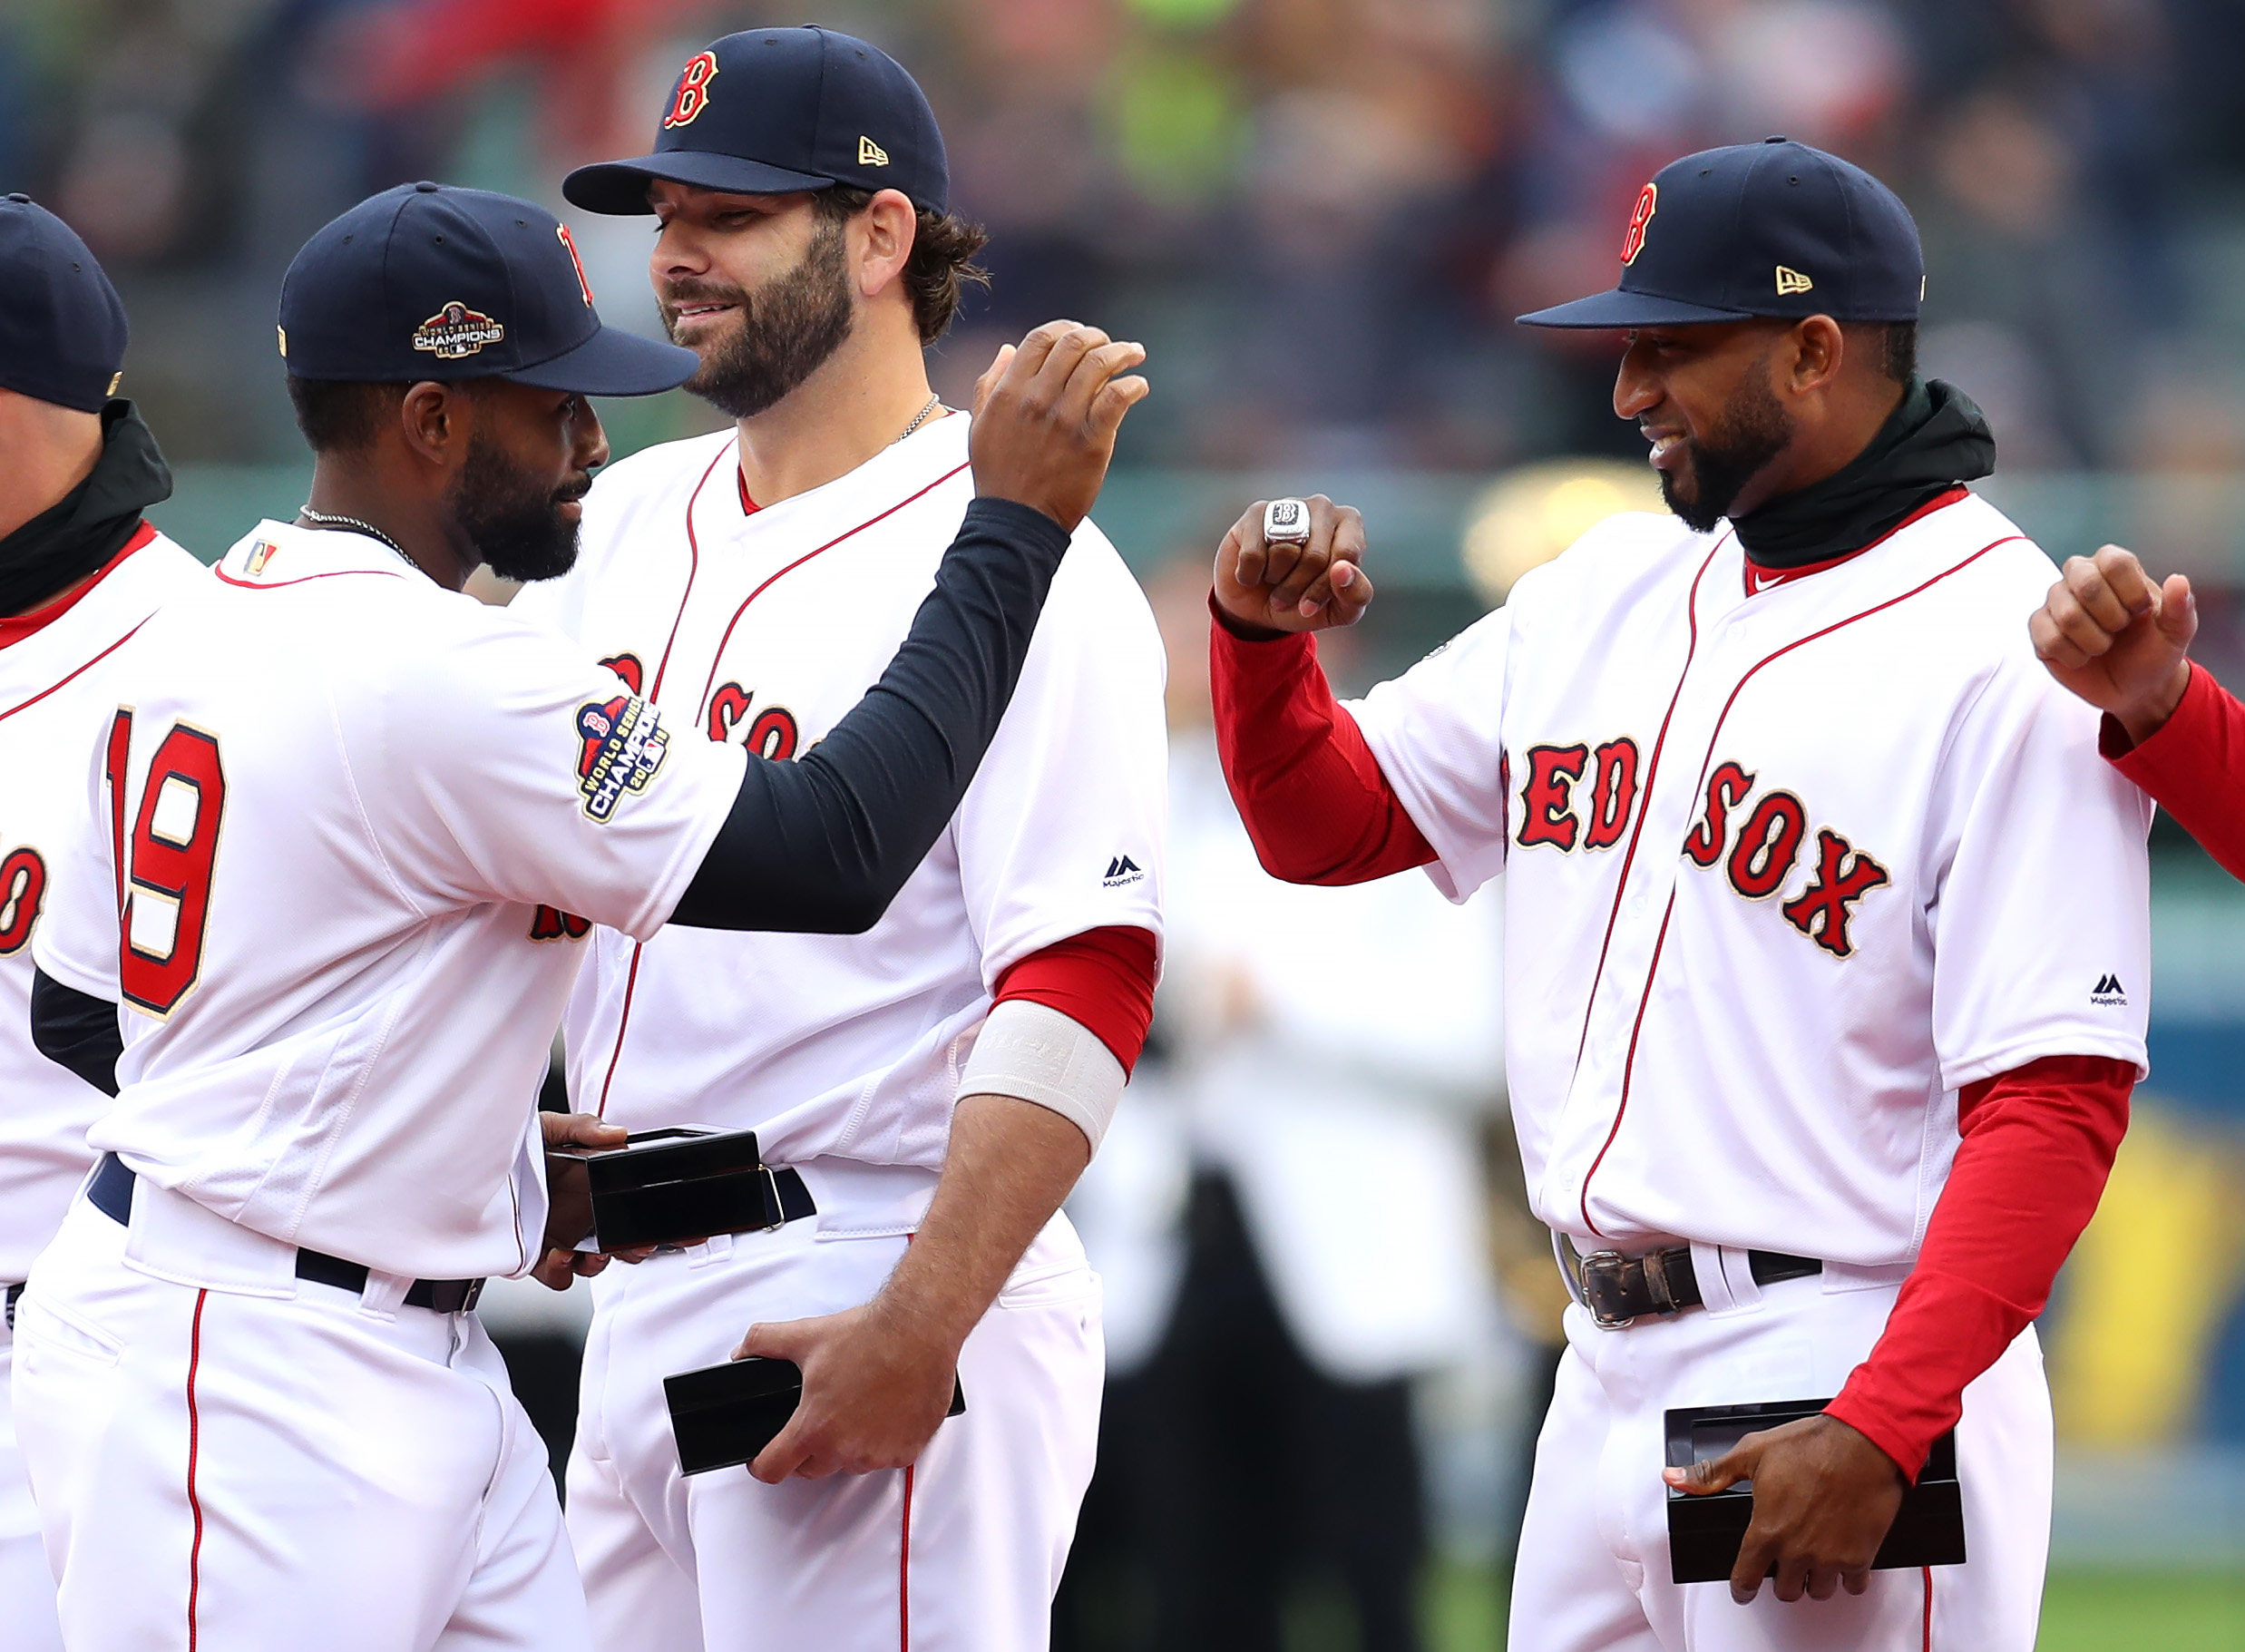 Red Sox Giving Away Commemorative World Series Rings During 2019 Season -  CBS Boston